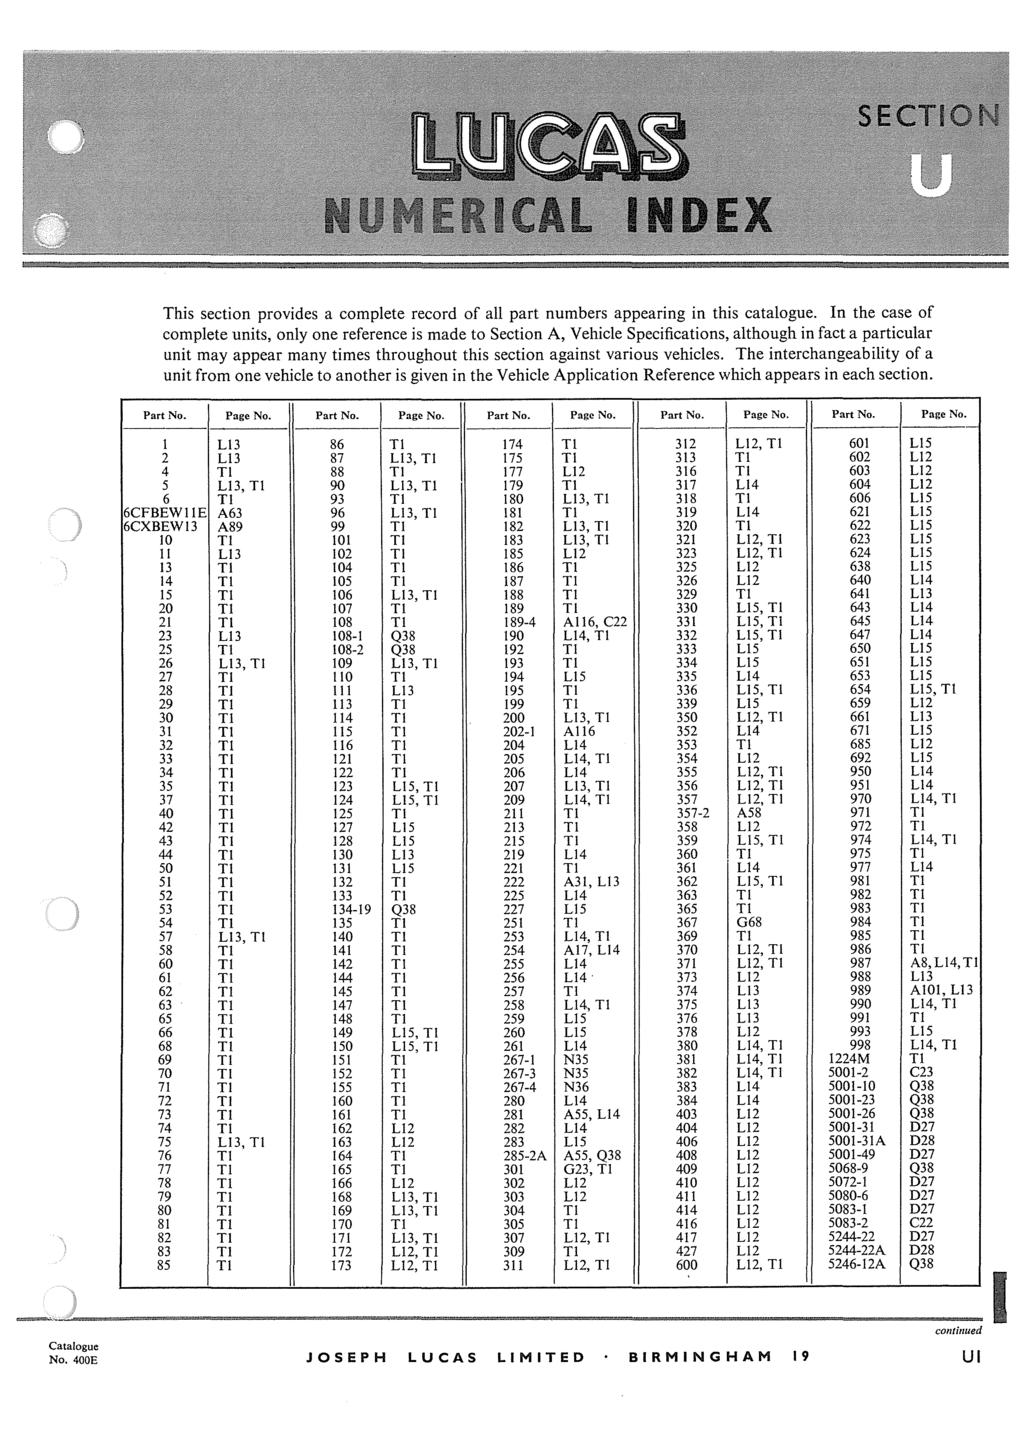 This section provides a complete record of all part numbers appearing in this catalogue.